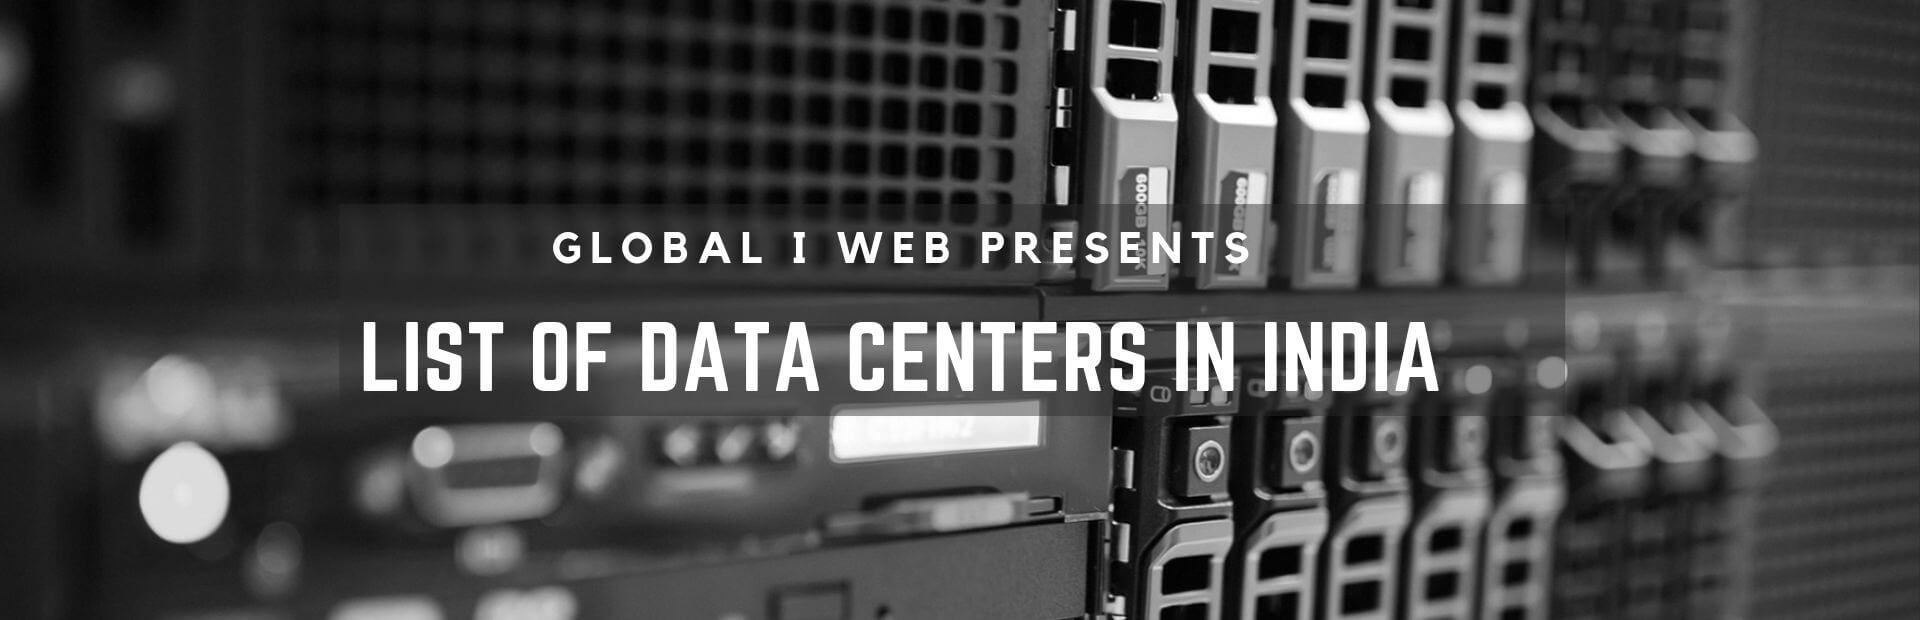 Data Centers In India | All Indian Data Centers